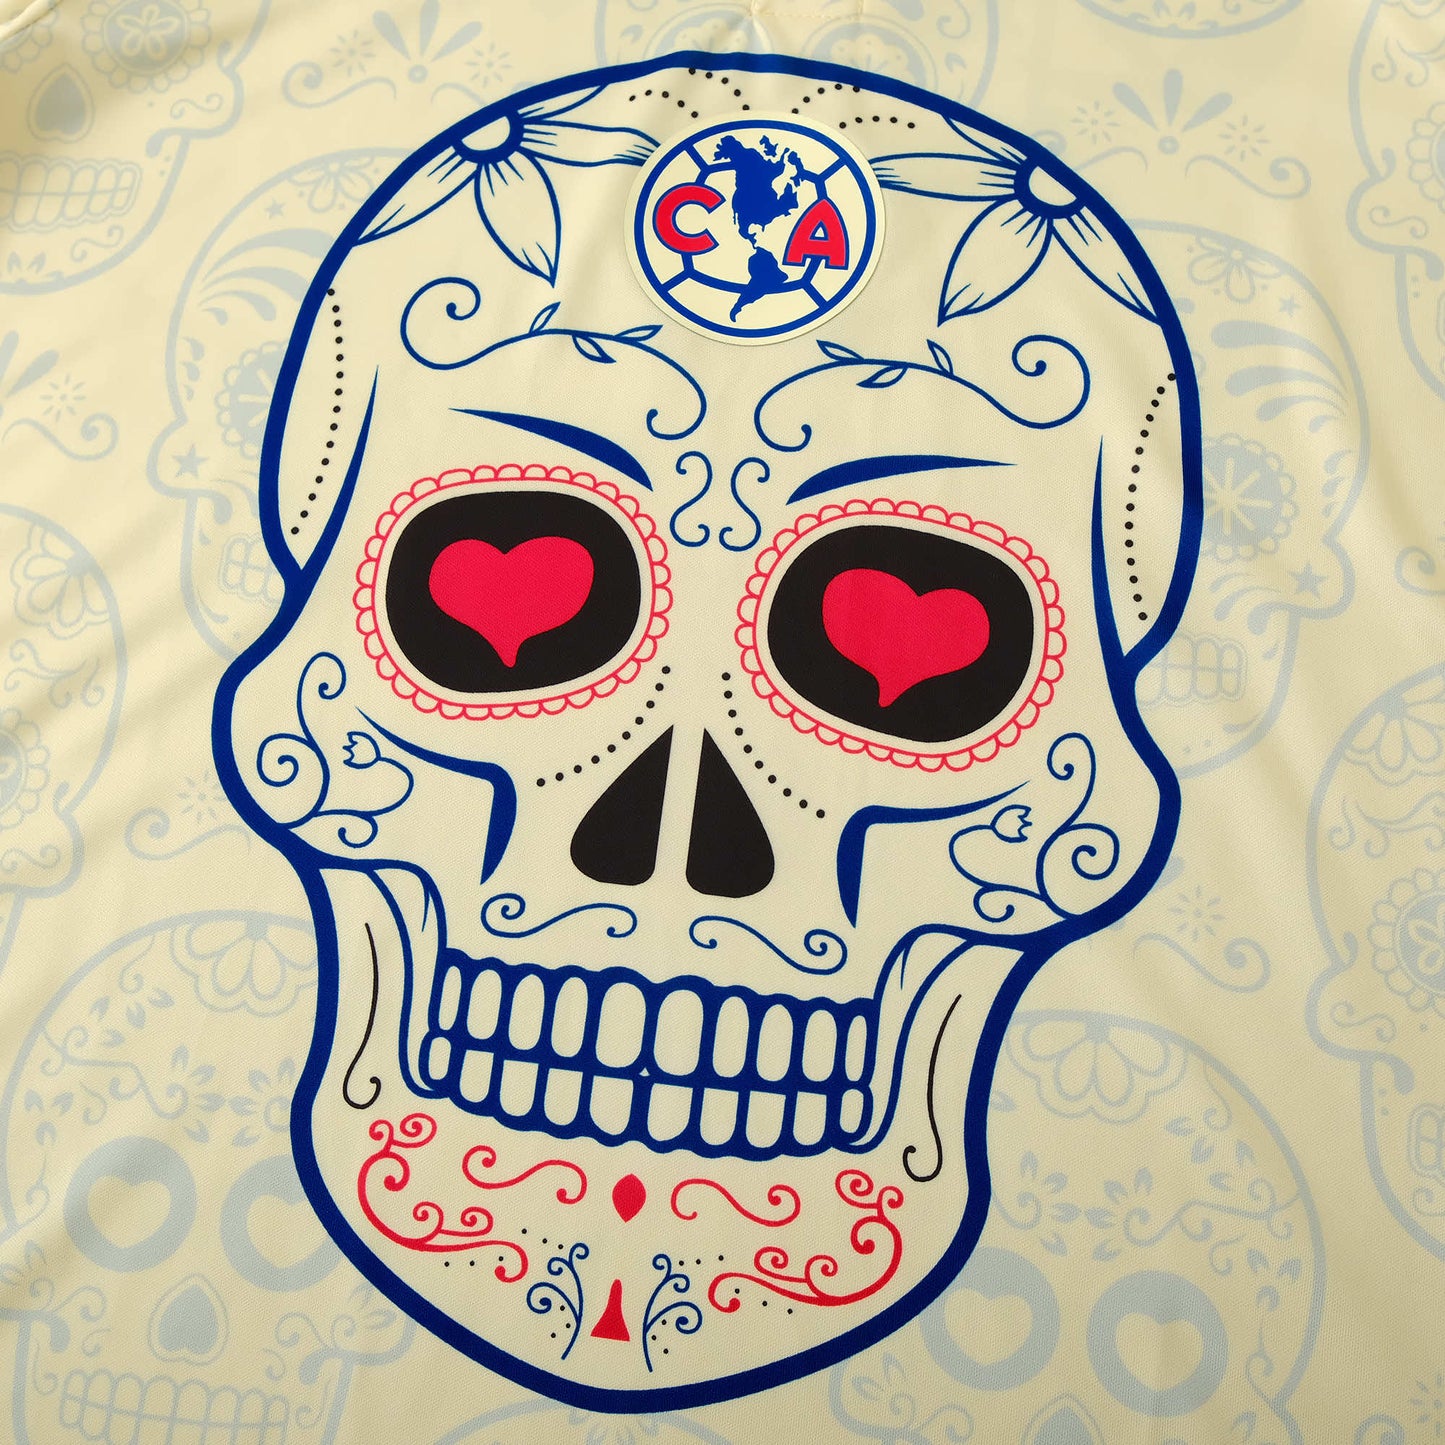 CLUB AMERICA 2023/24 'DAY OF THE DEAD' SPECIAL EDITION SHIRT - Shirt - False9Fits